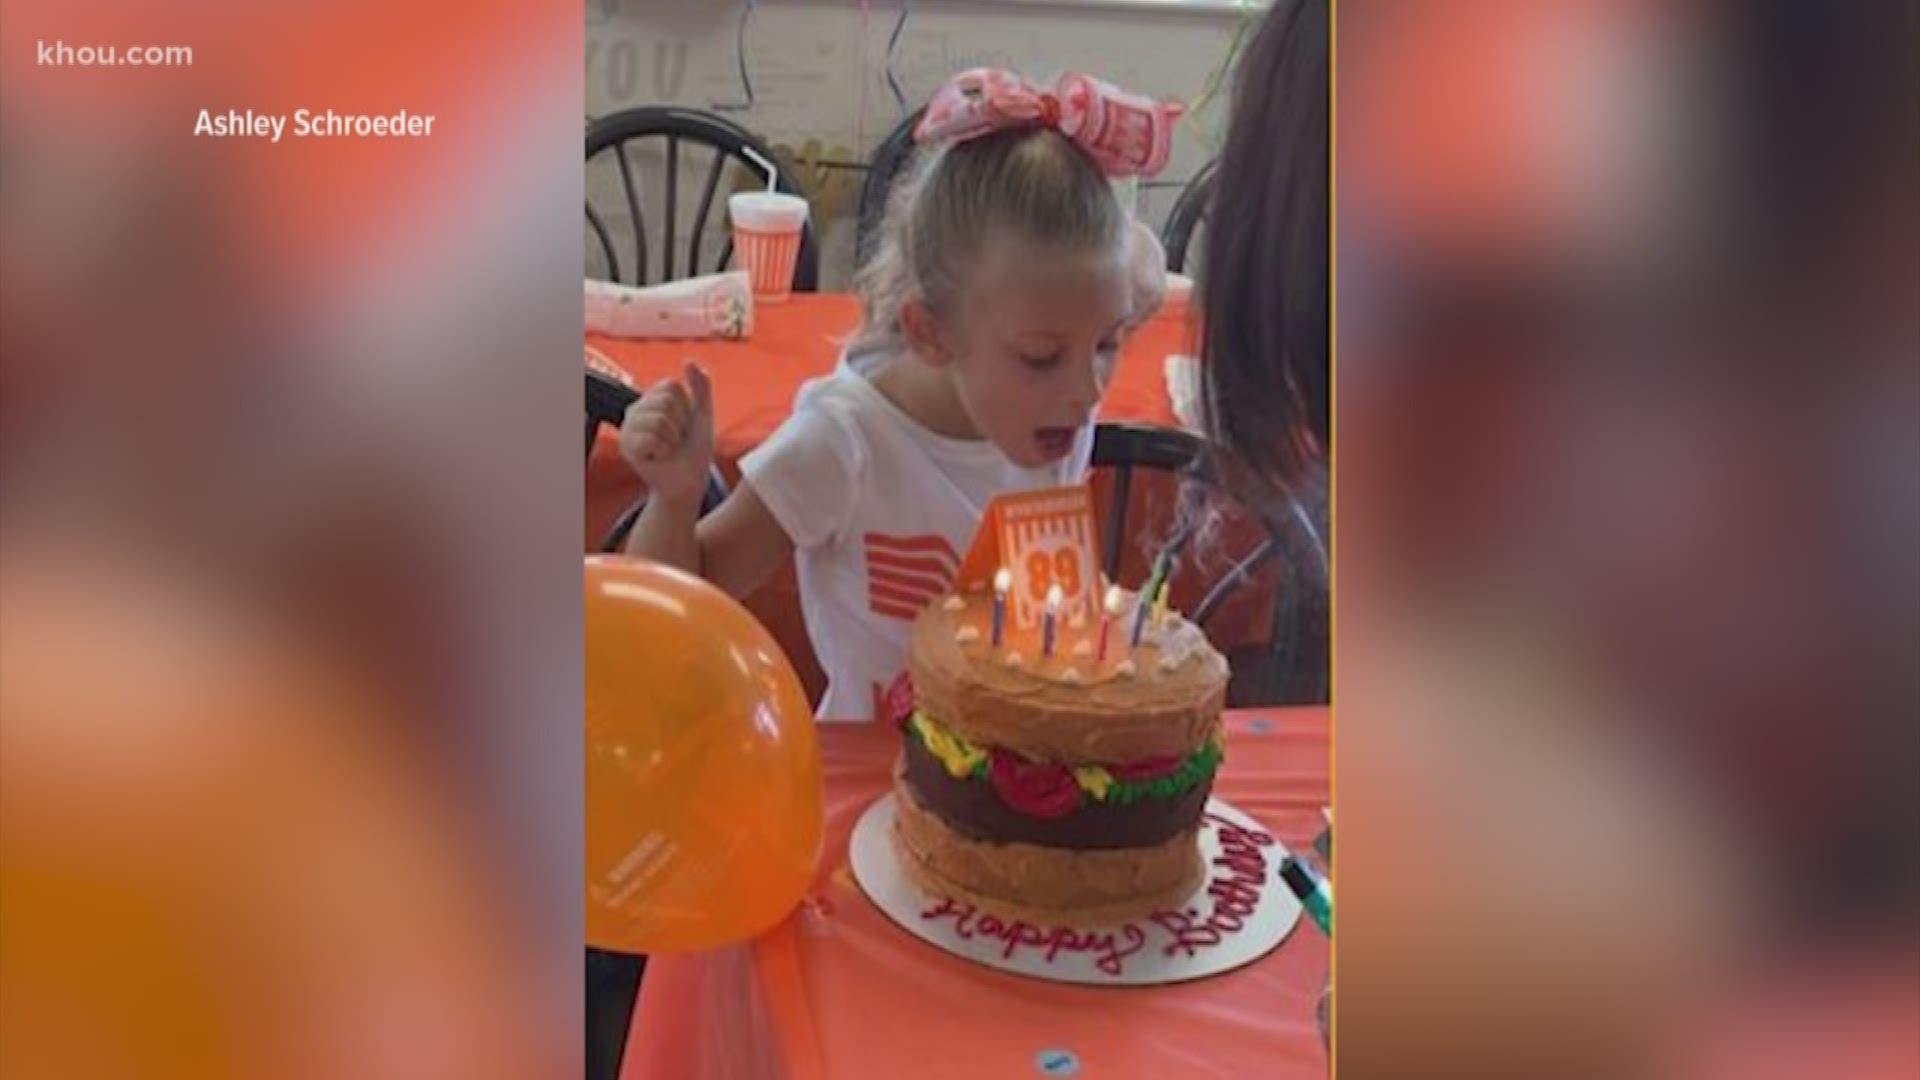 A young girl had the most memorable 6th birthday at a Whataburger in Vidor.